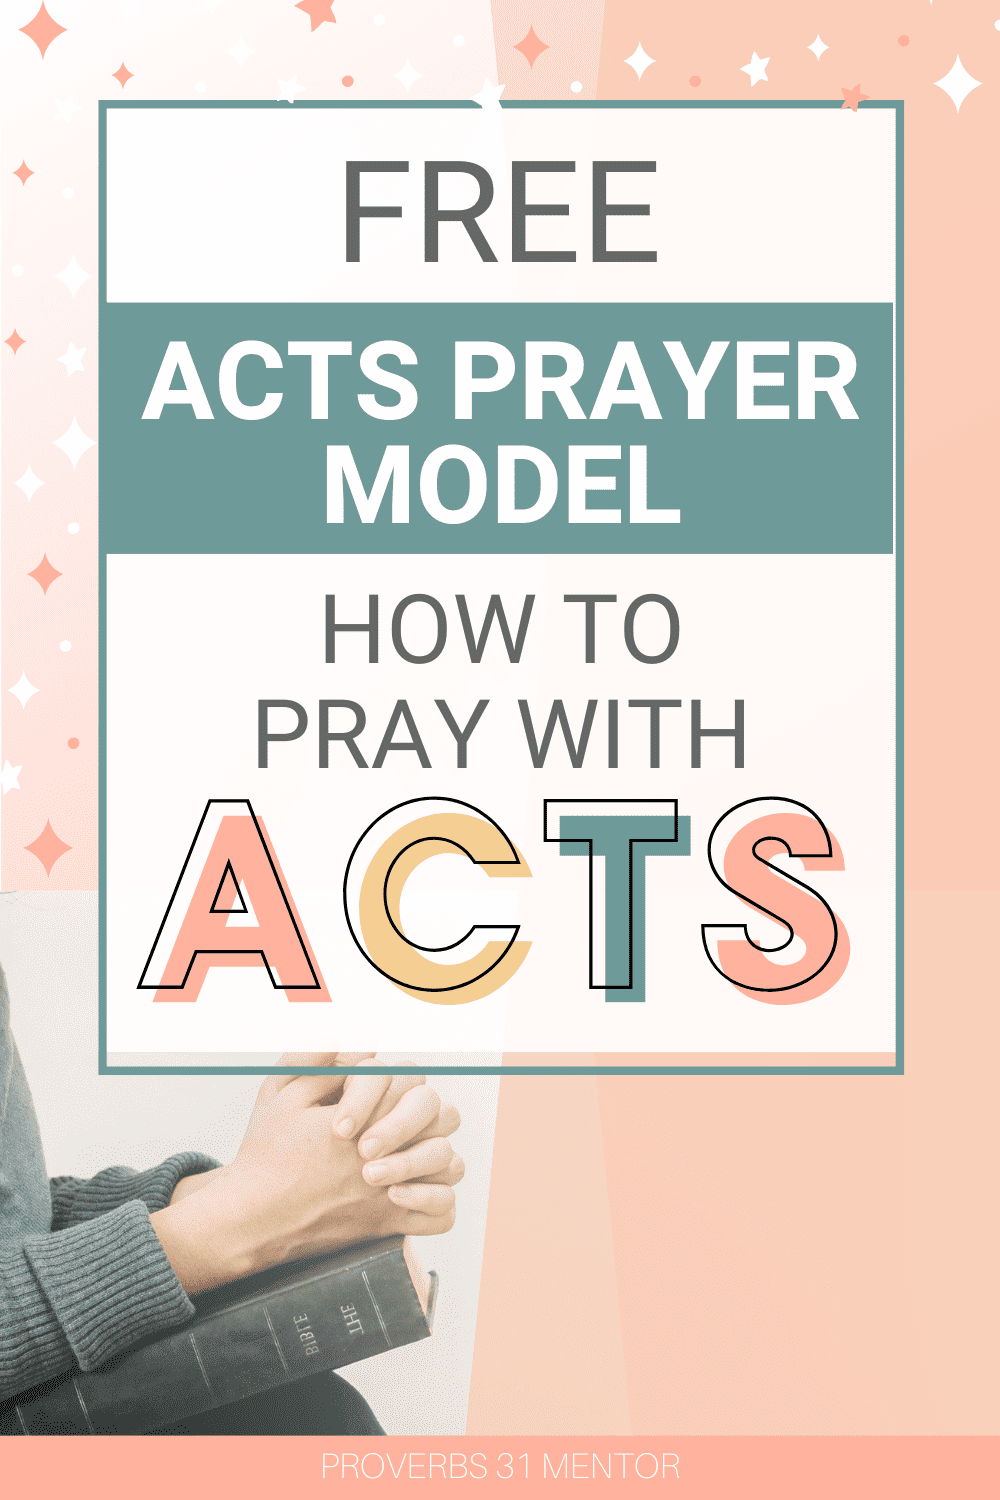 Title- Free ACTS prayer model: How to pray with ACTS Picture: woman's hands praying on a black Bible resting on her knees